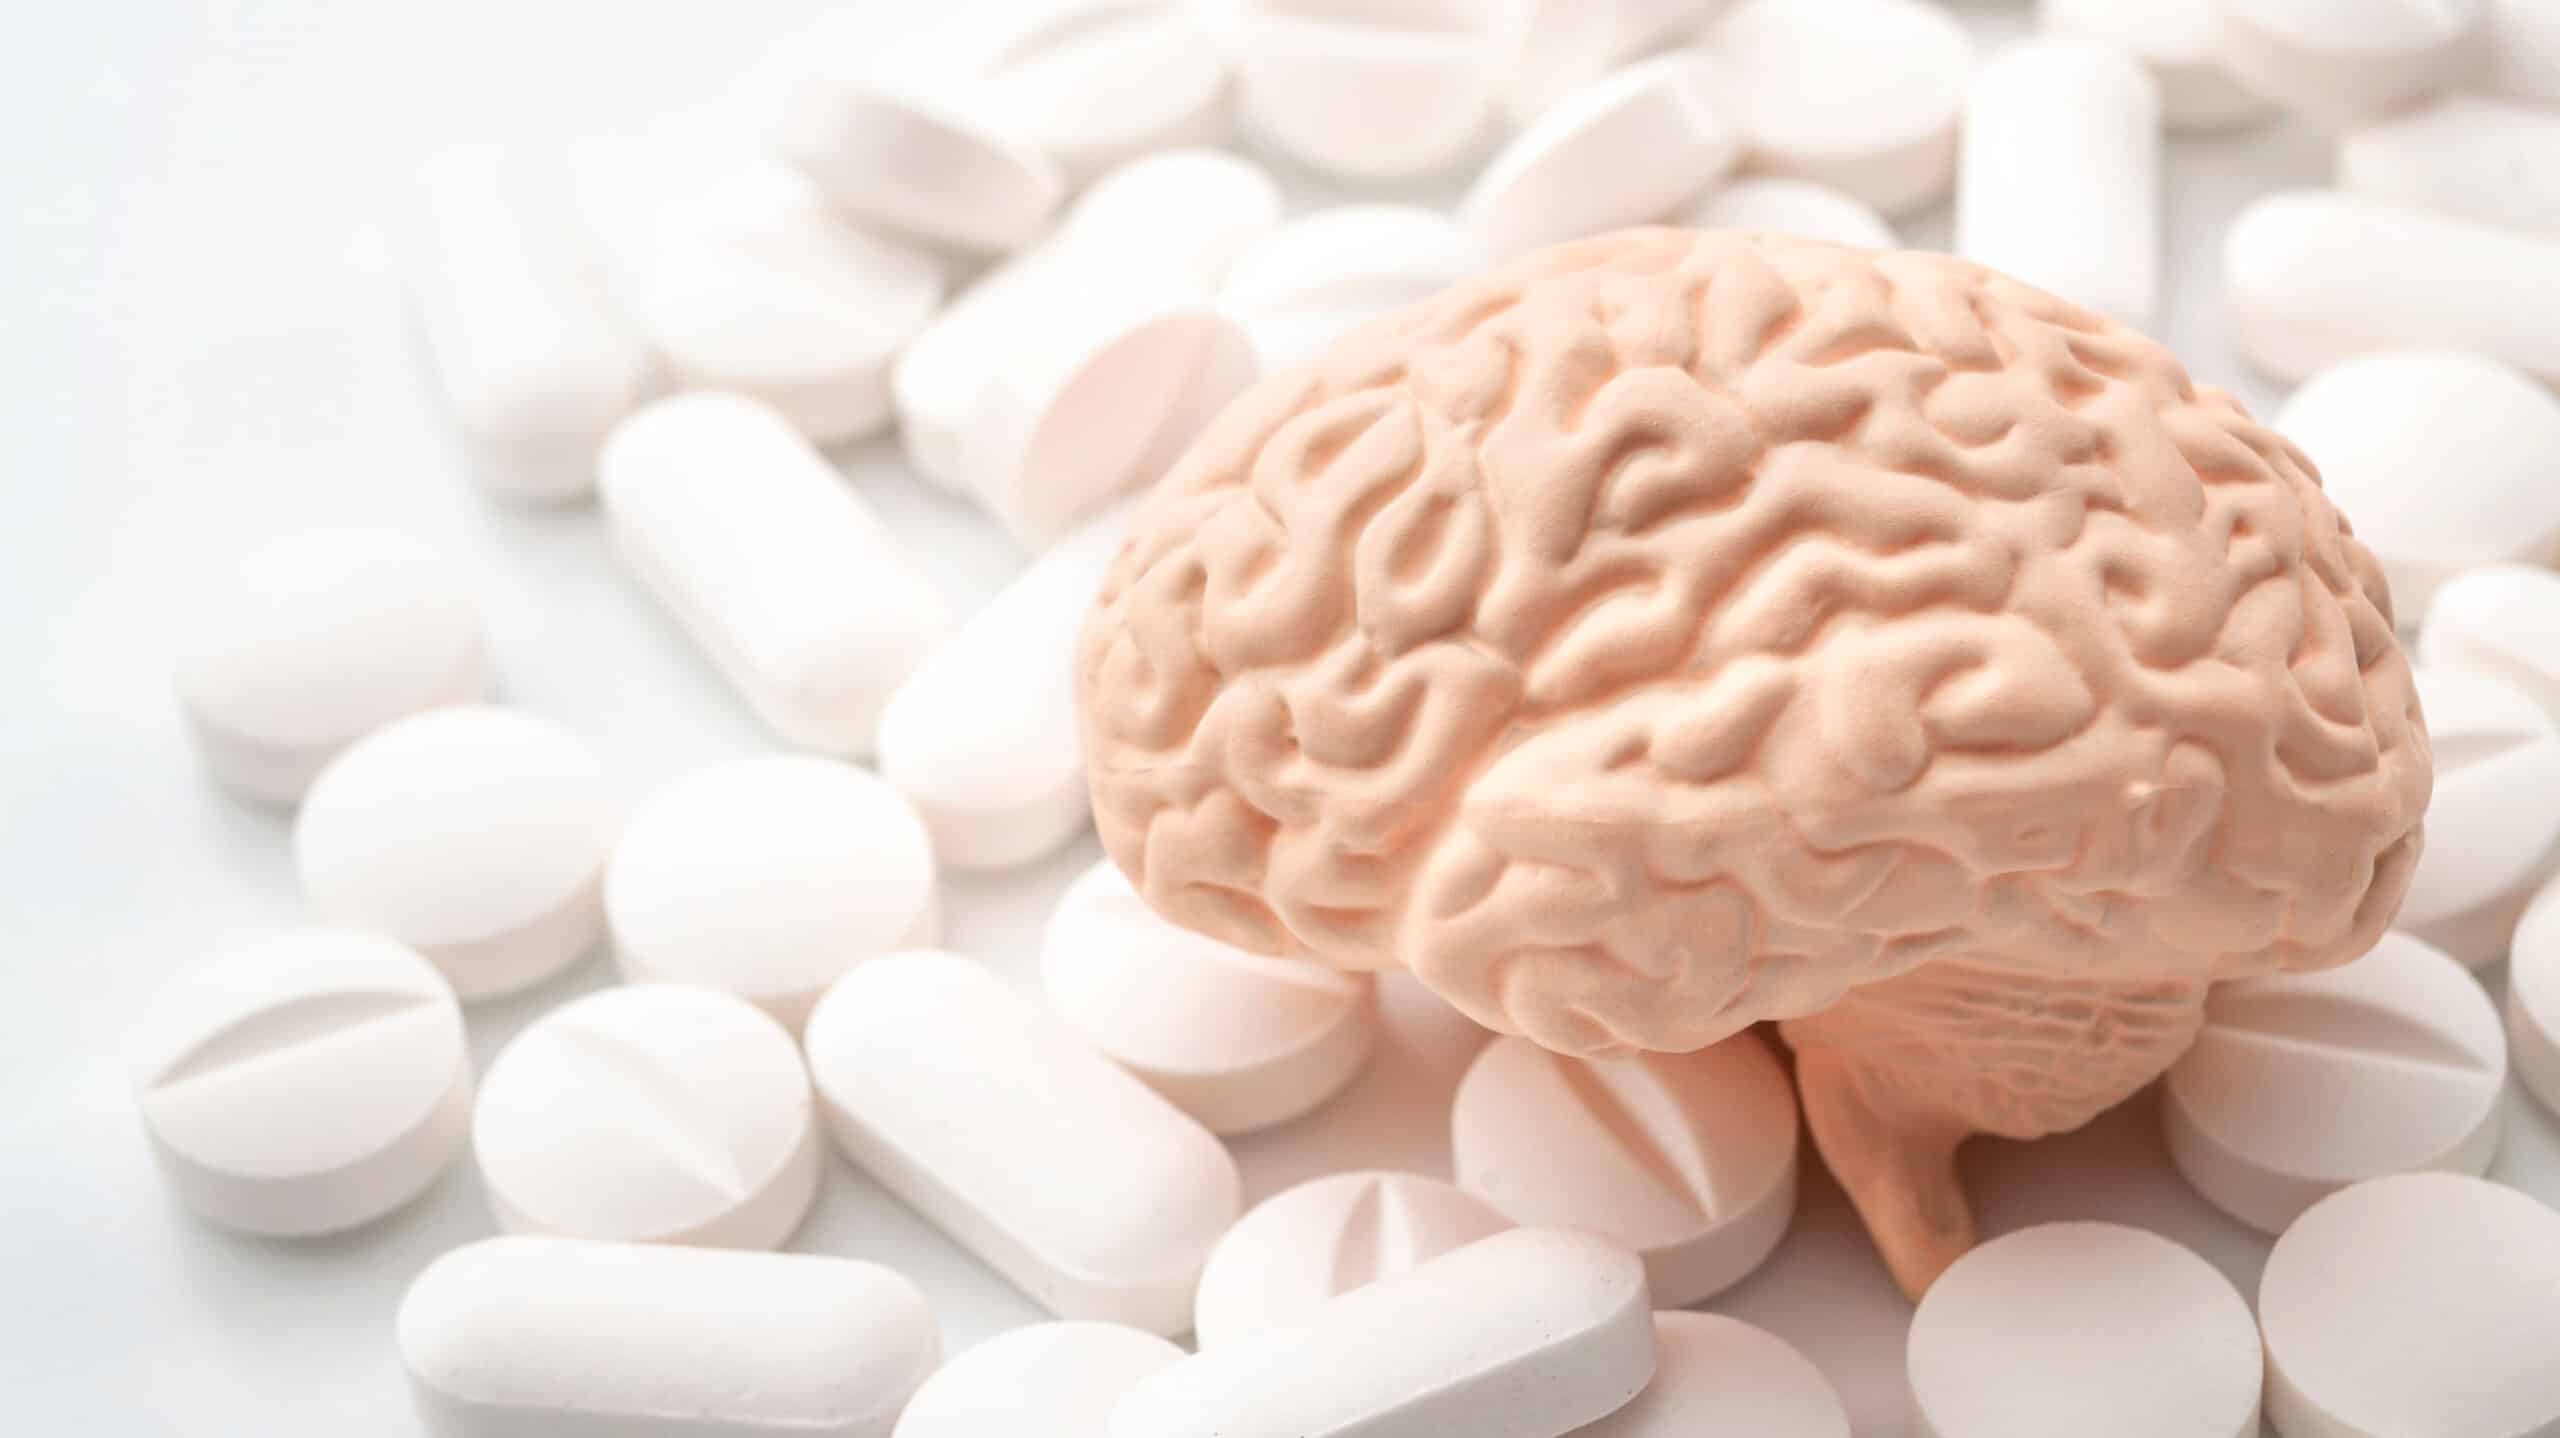 A toy brain sits on a pile of pills - How Alcohol & Drug Misuse Affects Mental Health